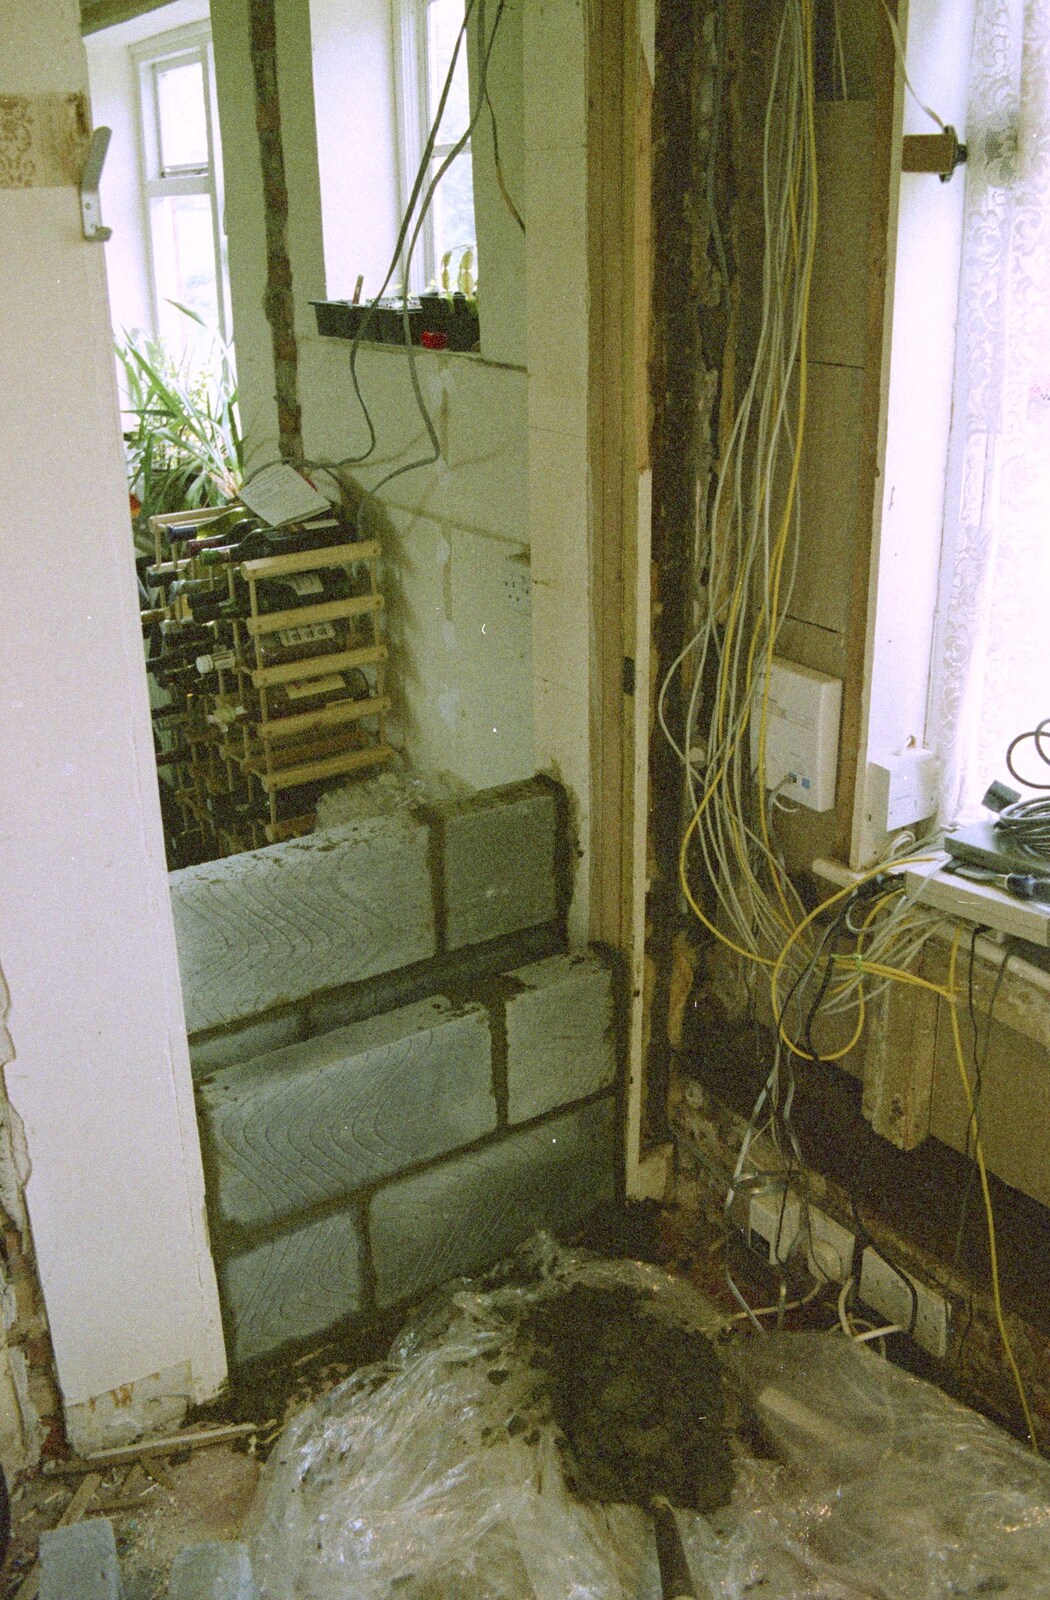 An old door to the pantry is bricked up from 3G Lab, and Building a Staircase, Brome, Suffolk - 11th February 2001